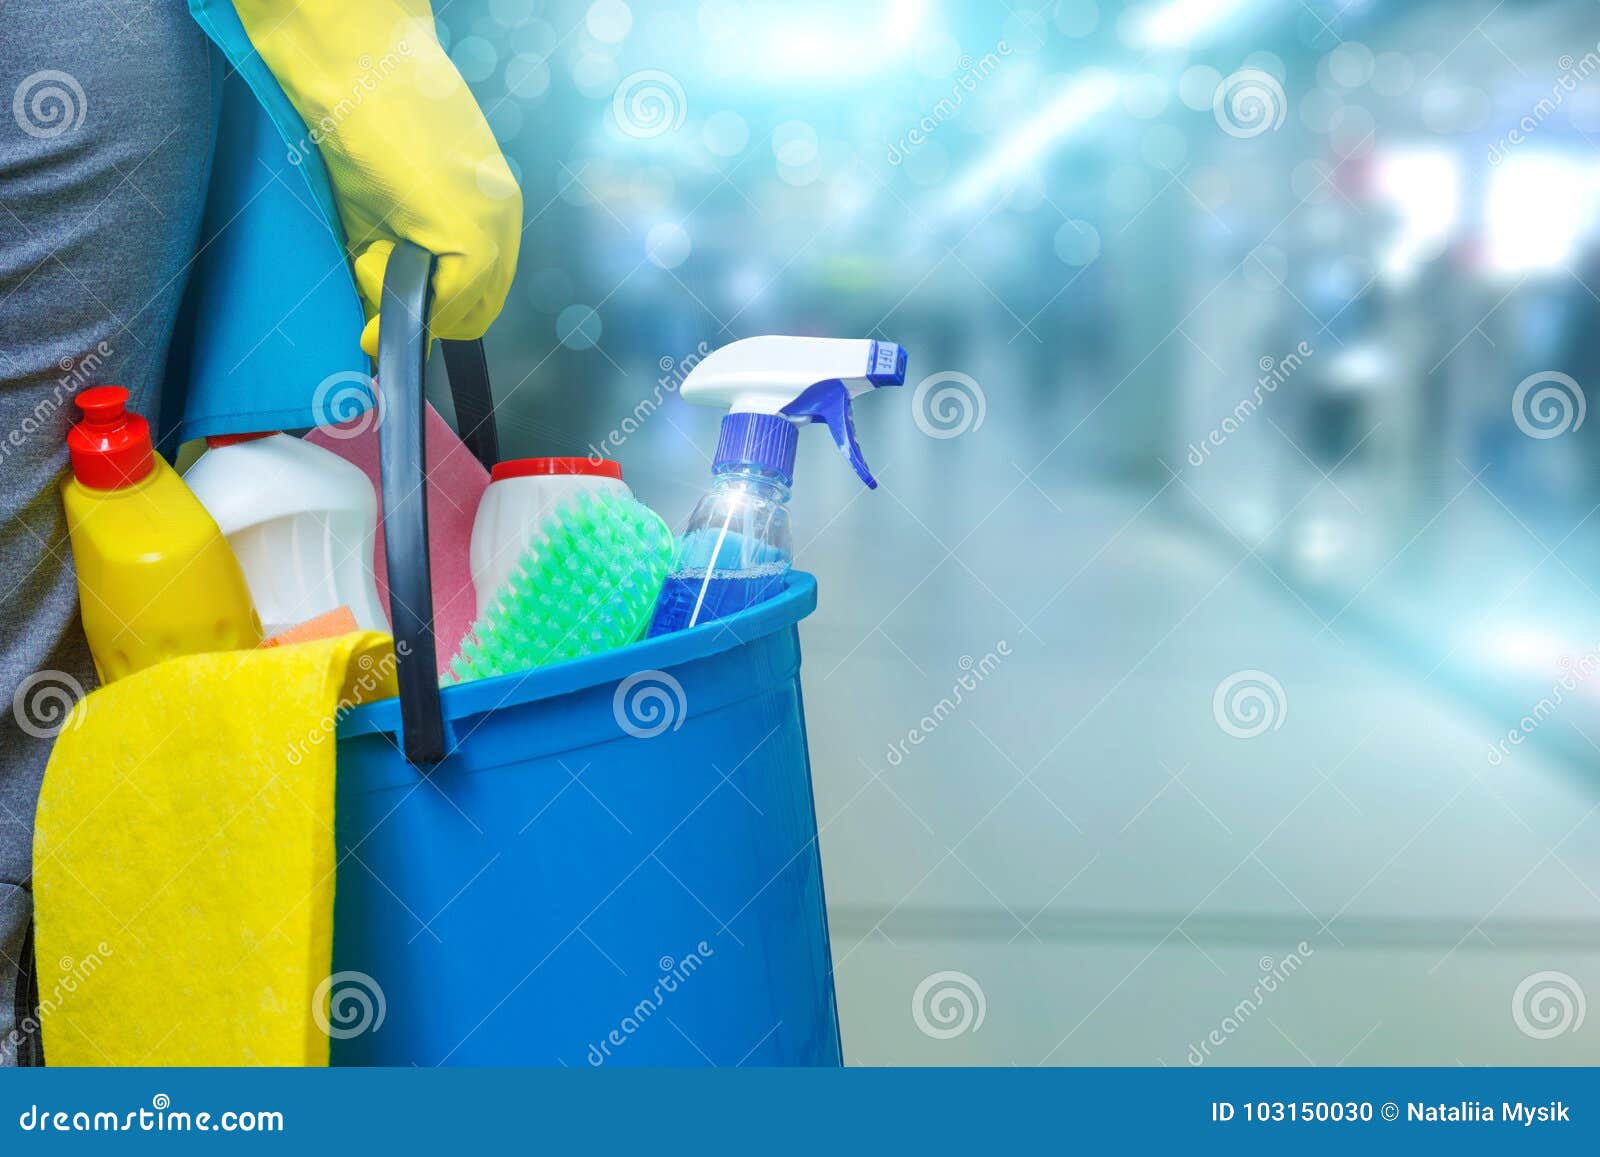 cleaning lady with a bucket and cleaning products .